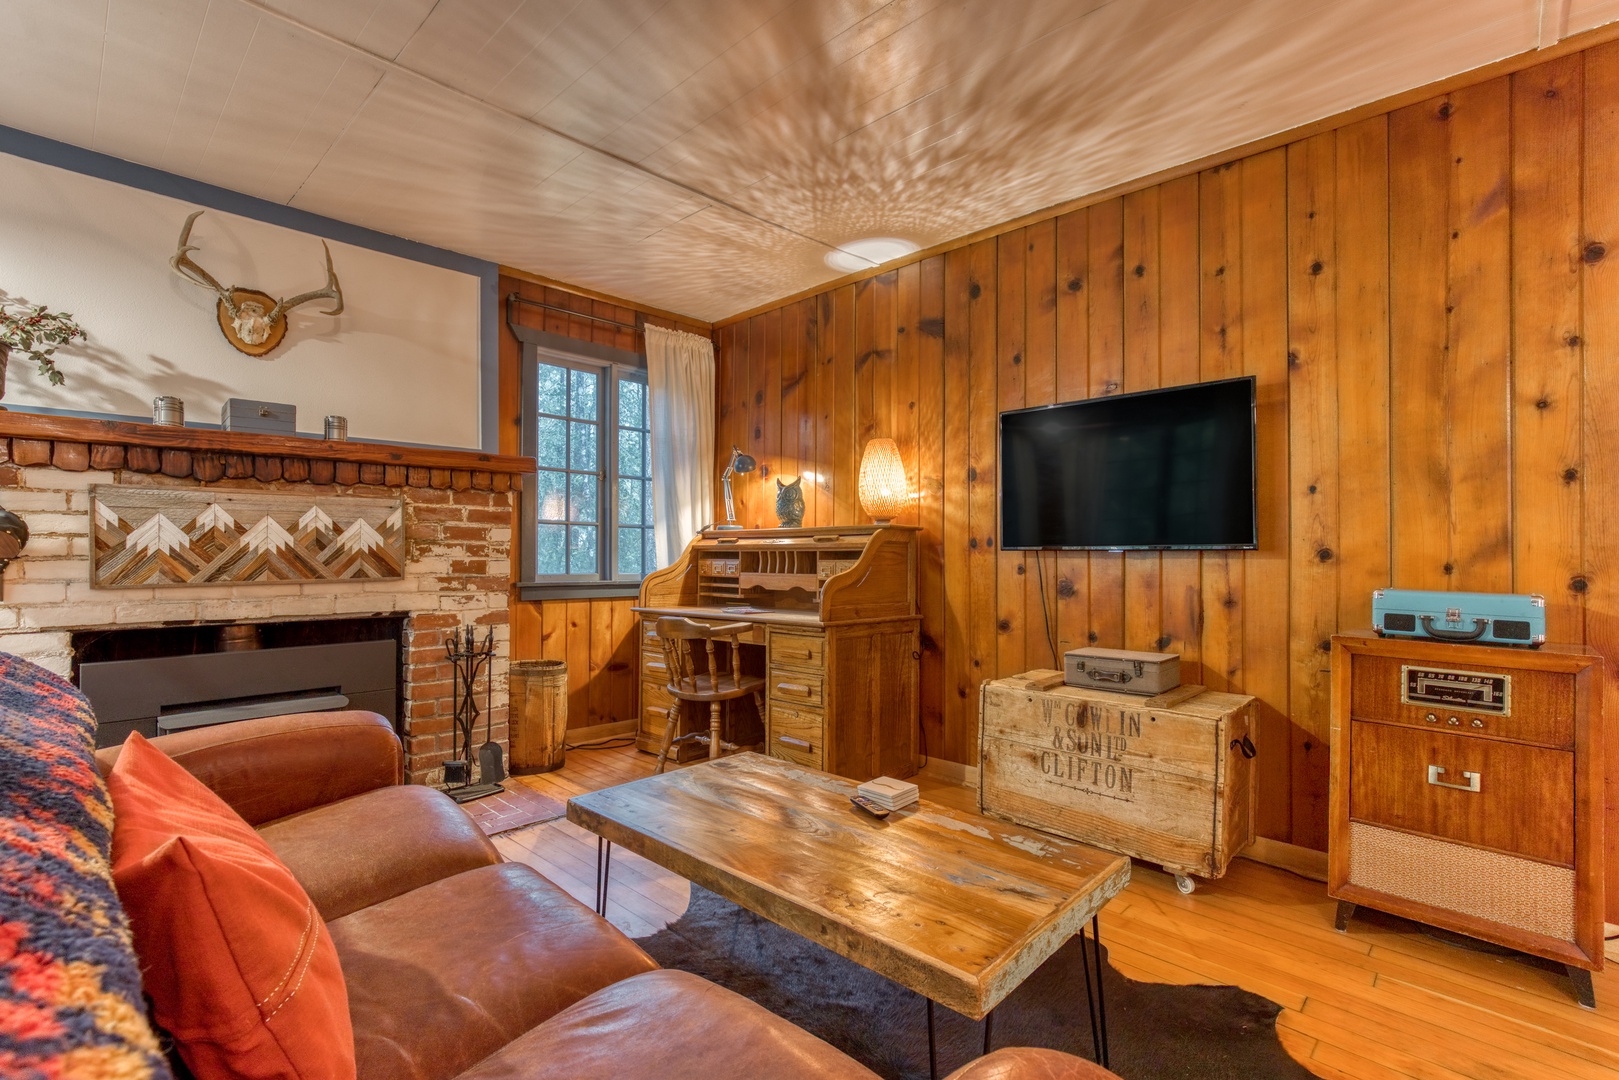 Brightwood Vacation Rentals, Springbrook Cabin - Another angle of the cozy living room